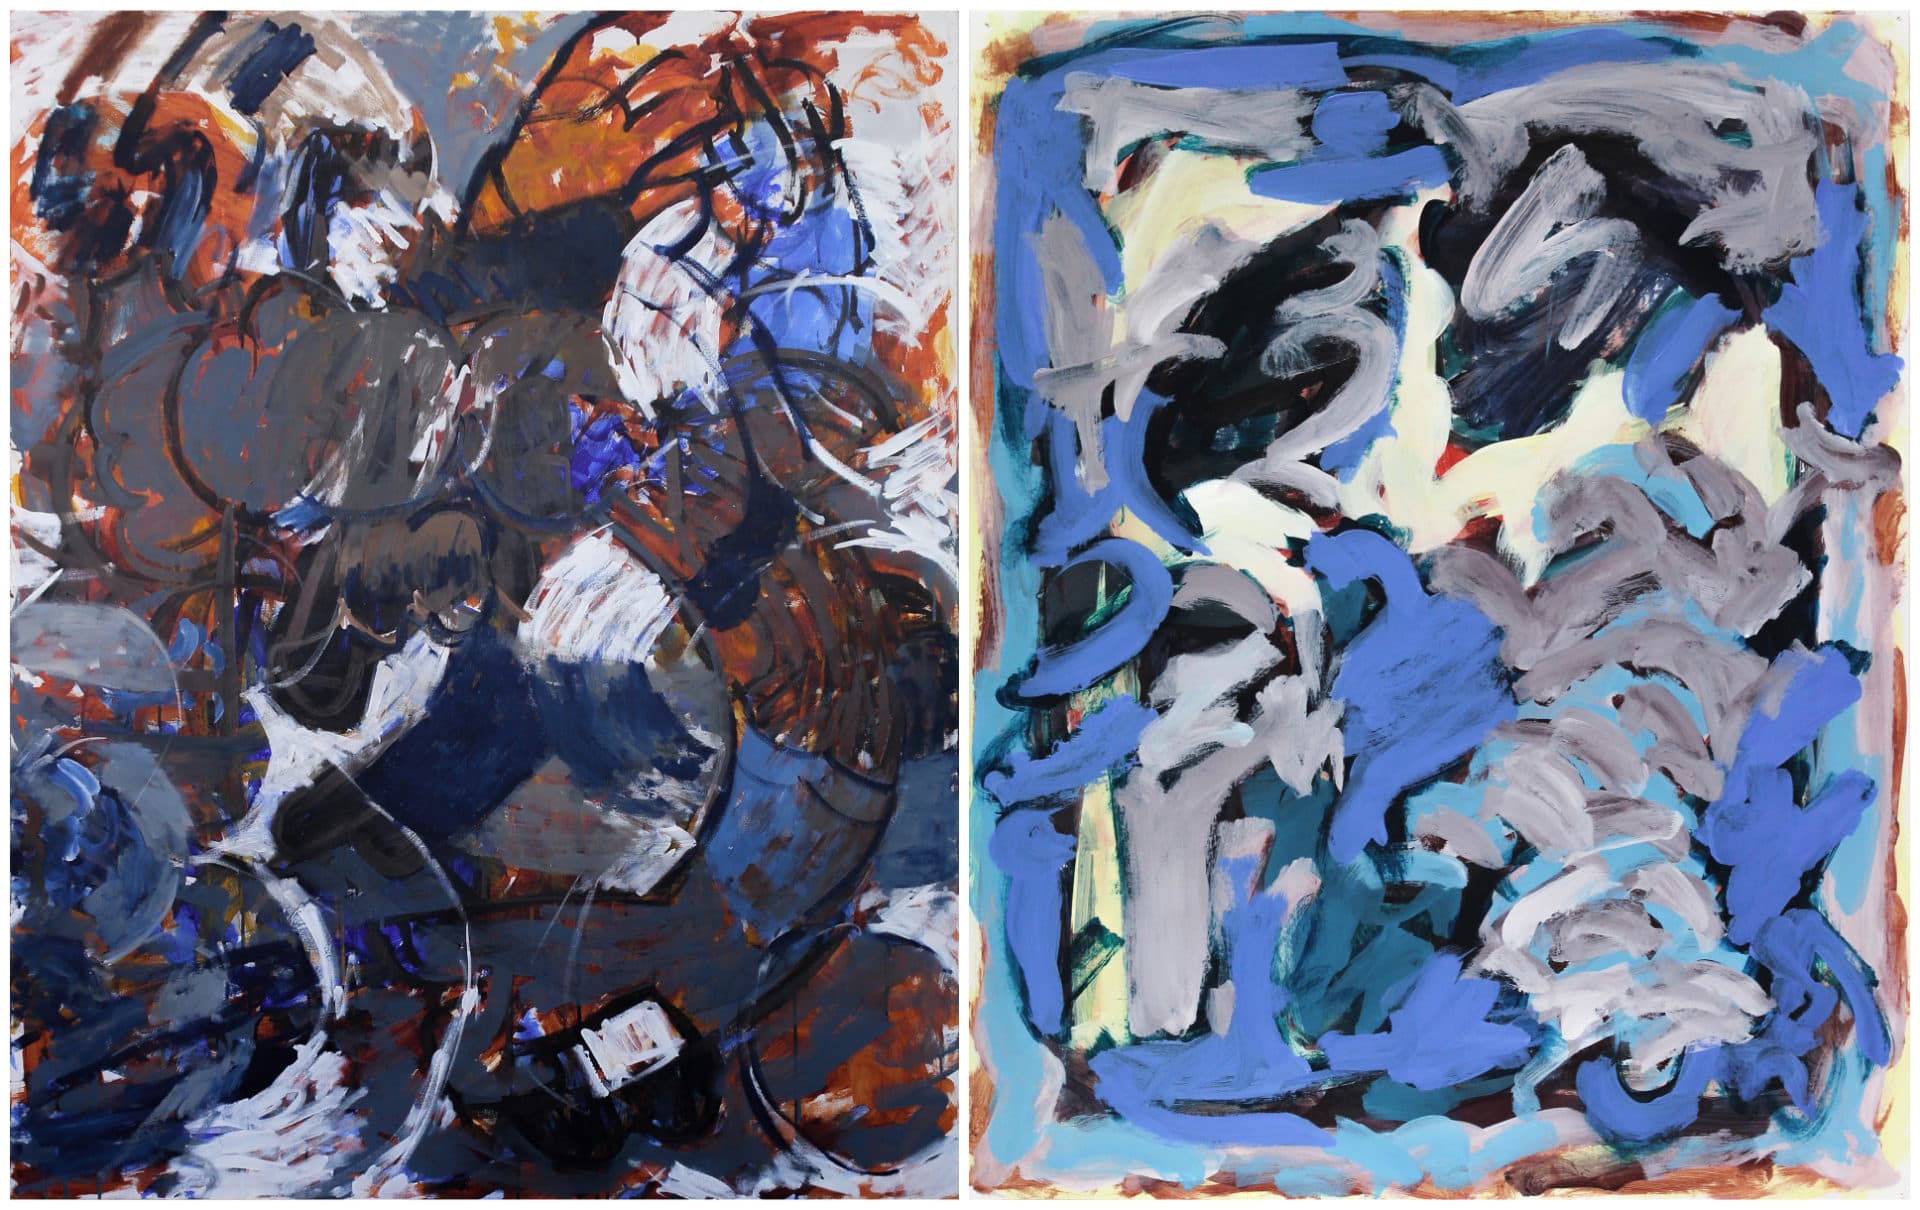 Demetri Espinosa's works &quot;Drowning&quot; (left) and &quot;Deep End.&quot; (Courtesy LaiSun Keane)